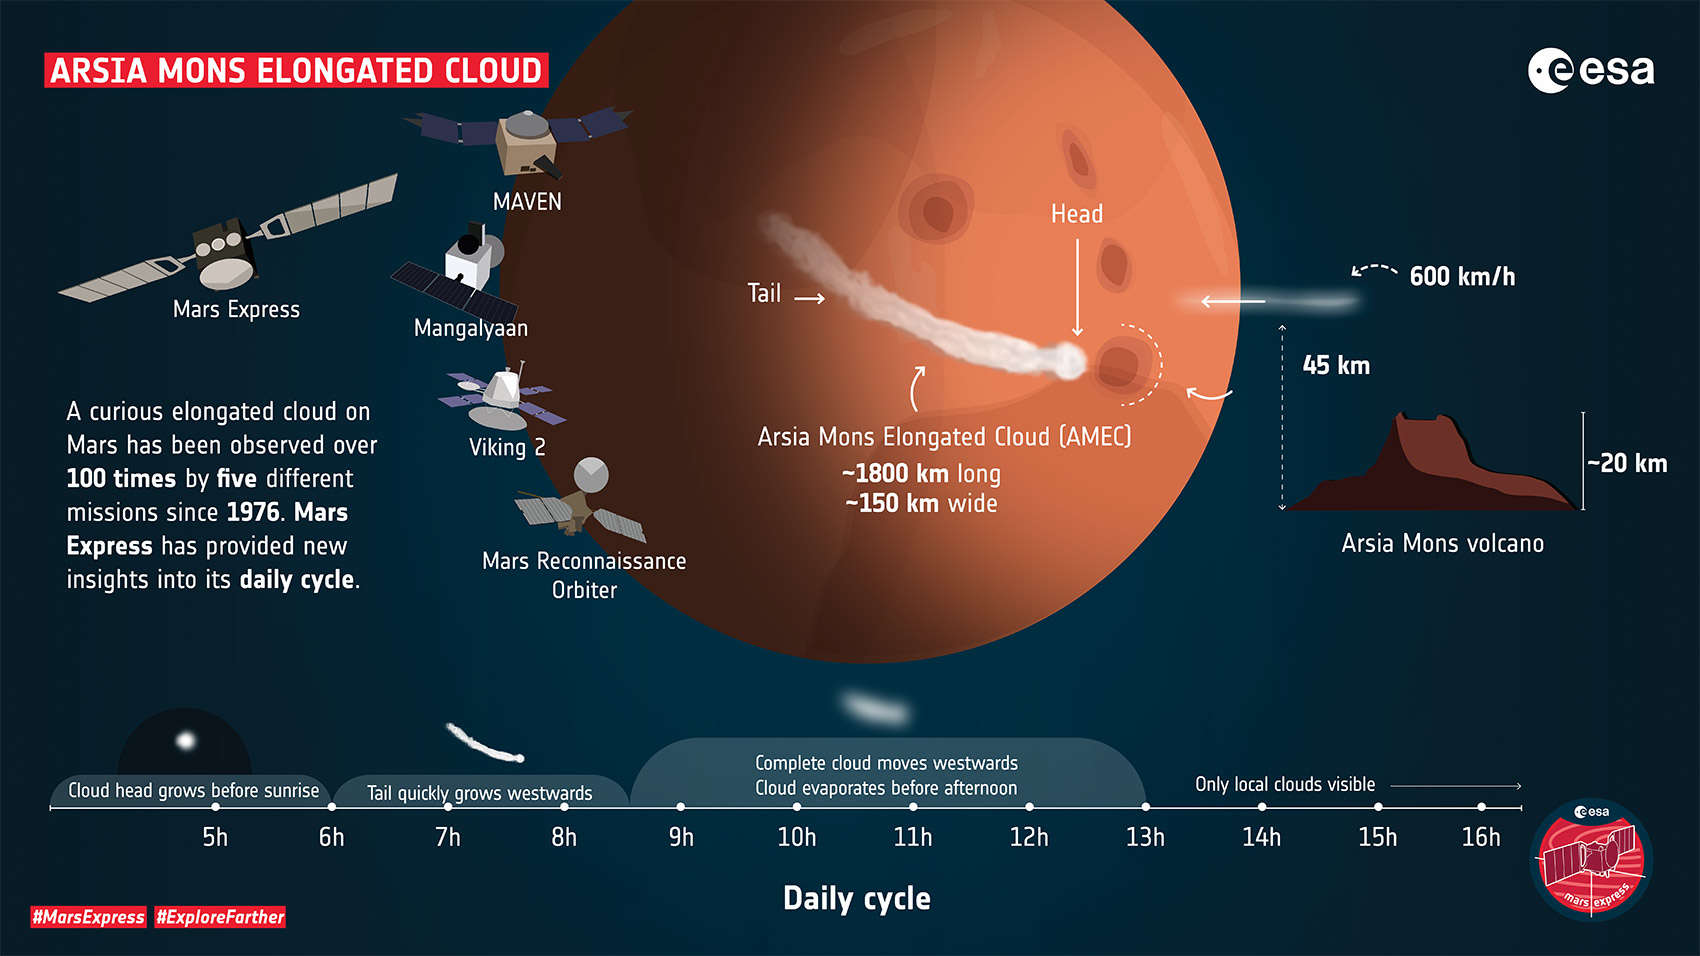 A schematic of details on the elongated cloud that grows every day in the summer around the Martian volcano Arsia Mons. Credit: ESA